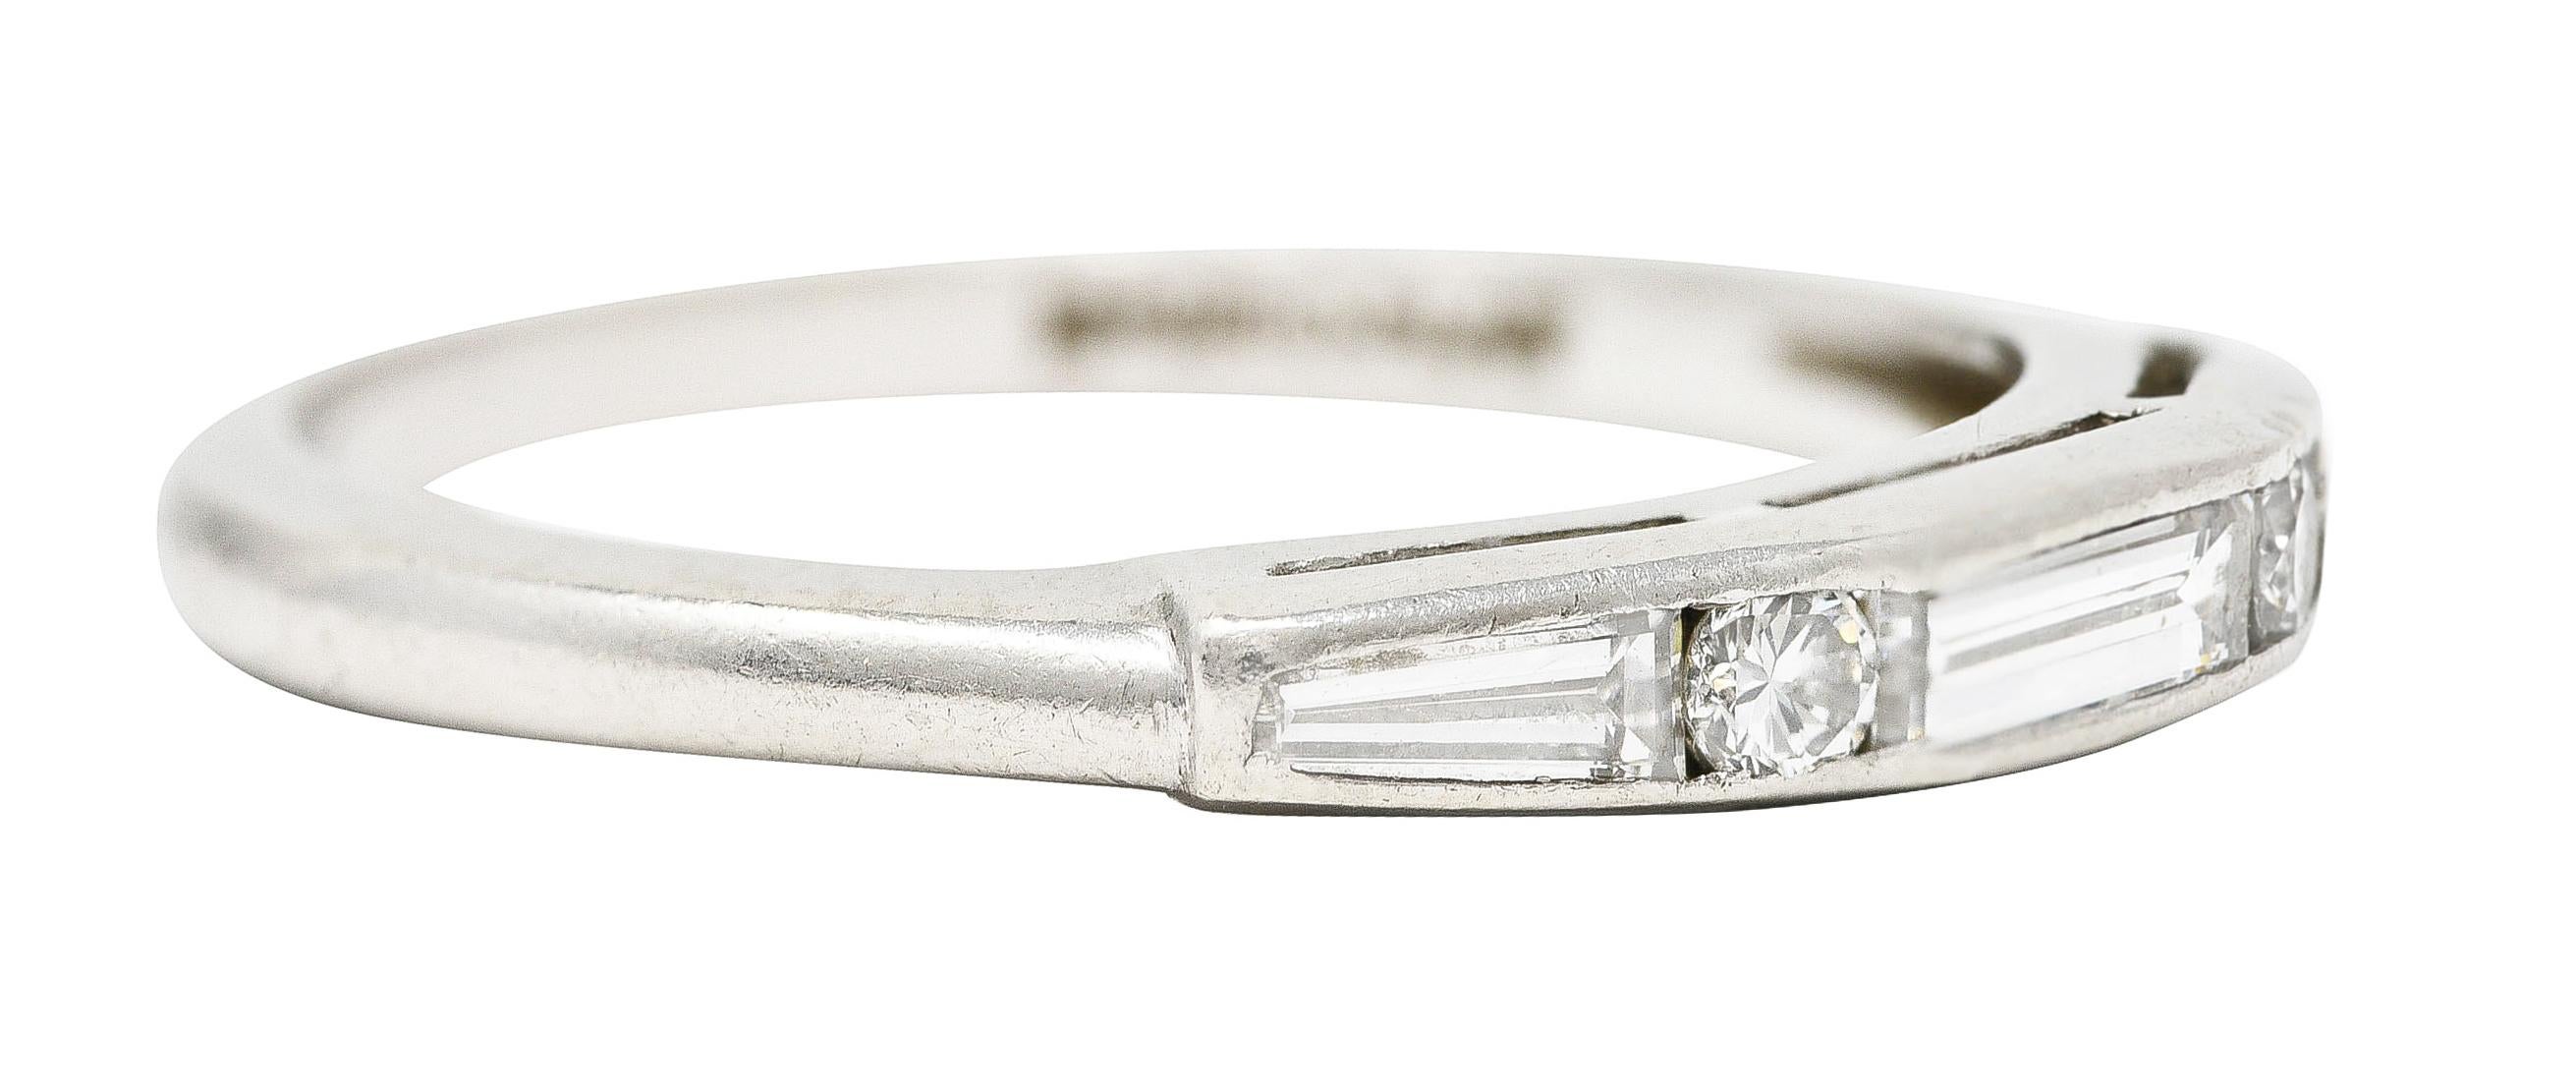 Centering a baguette cut diamond flanked by tapered baguette cut diamonds. Weighing approximately 0.20 carat total - G/H colorwiht VS color. Channel set East to West and alternating with single cut diamonds. Weighing approximately 0.06 carat total -